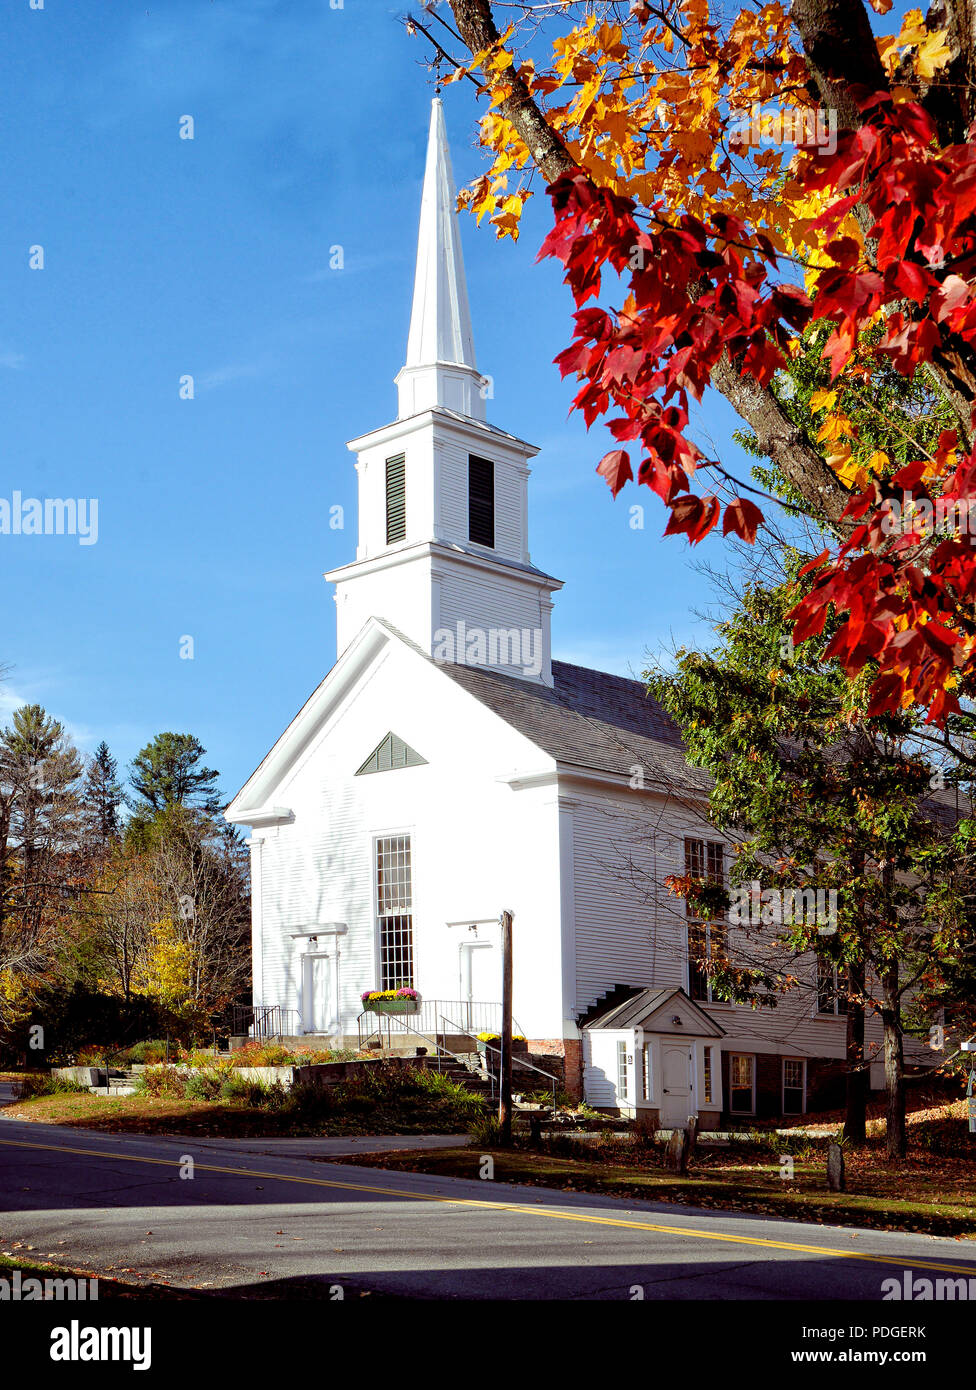 The Grafton Congregationist 'White Church', Grafton VT, known as the Brick Church. Built in 1833,.United Church of Christ congregation. Stock Photo